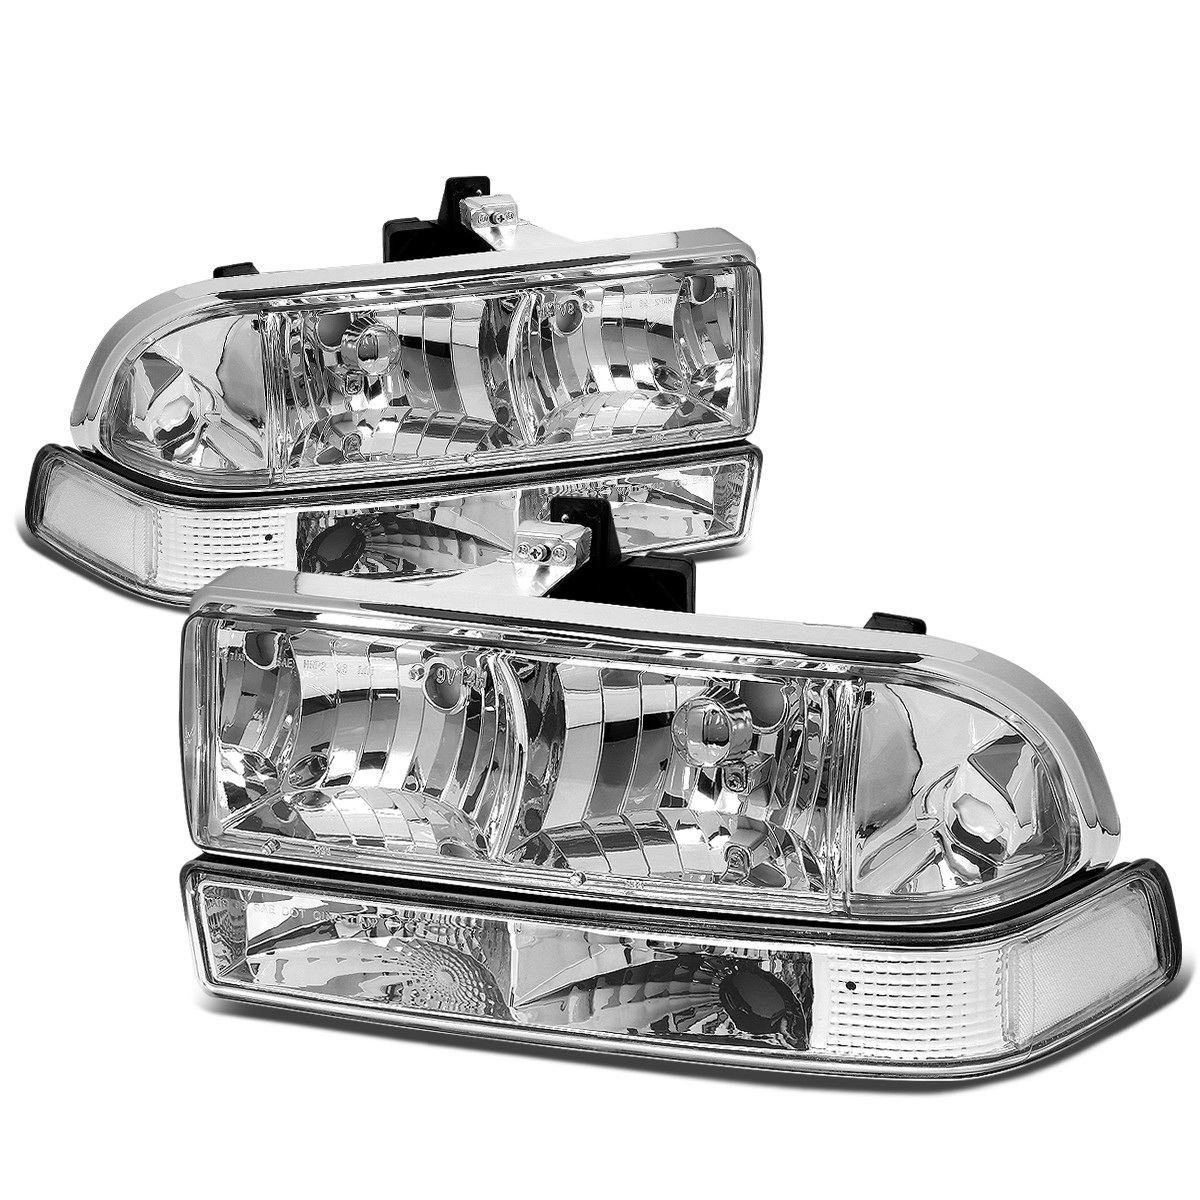 For 98 04 Chevy S10 Blazer GMT 325 330 Replacement HeadLight Assembly Kit